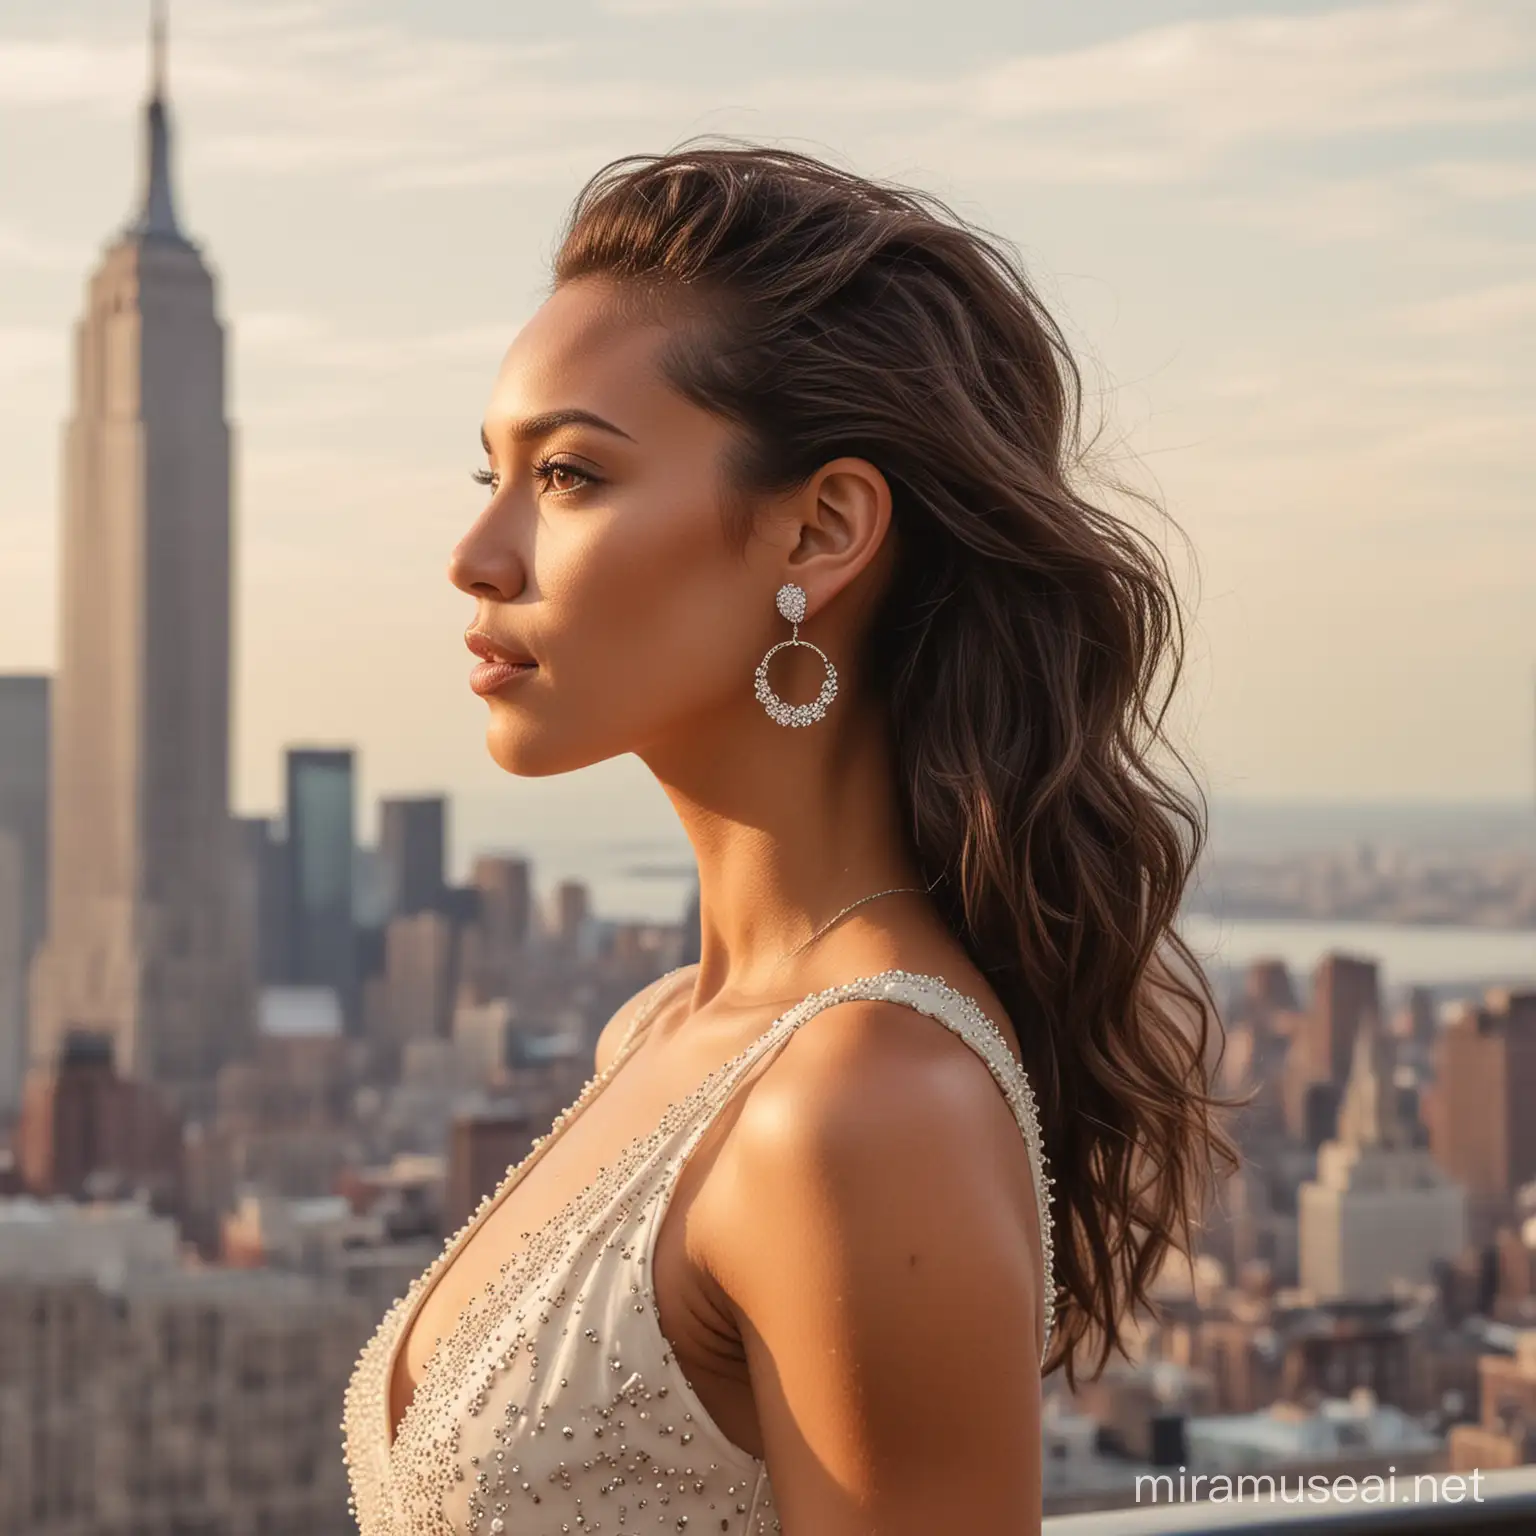 A real women model mixed race, professional photoshoot modelling small earrings, using a sexy  dress with cream colors, profile photoshoot looking the horizont, with newyork at background